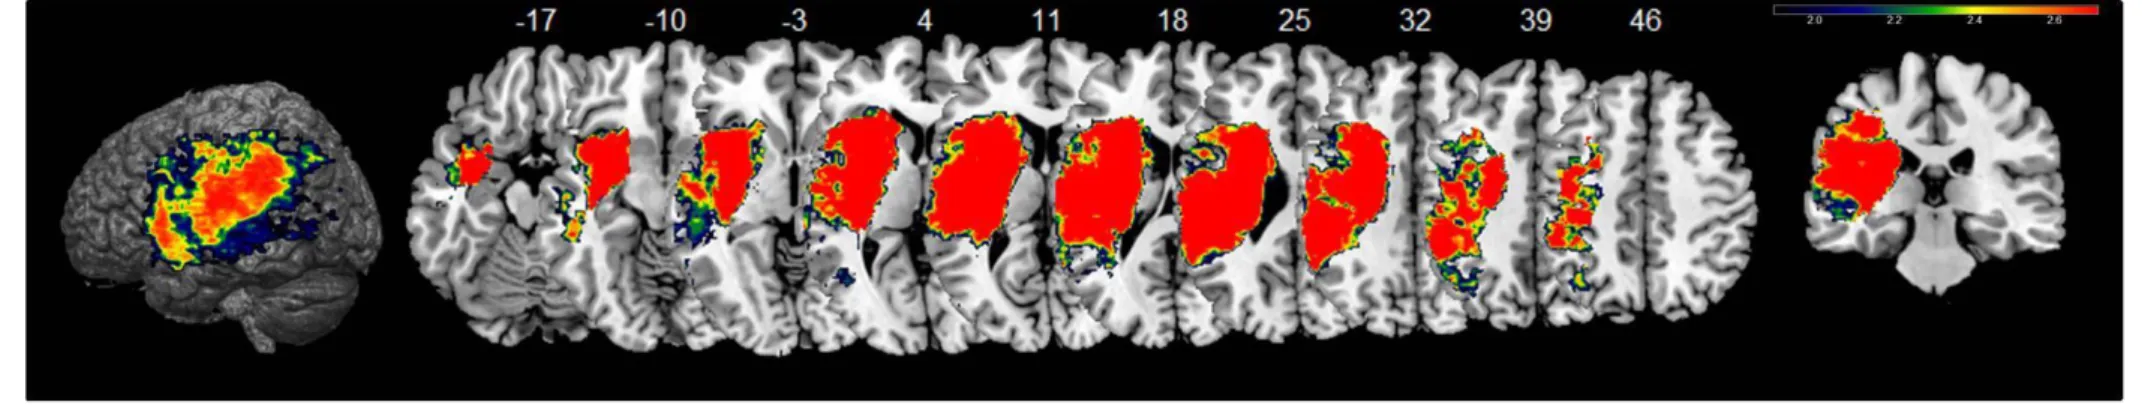 Figure  1:  aphasia  outcome  of  all  patients.  VLSM-maps  showing  lesions  significantly  associated  with  poor  outcome  assessed  by  the  Aphasia  Severity  Rating  Scale  6  month  after  the  stroke  (ASRS&lt;4)